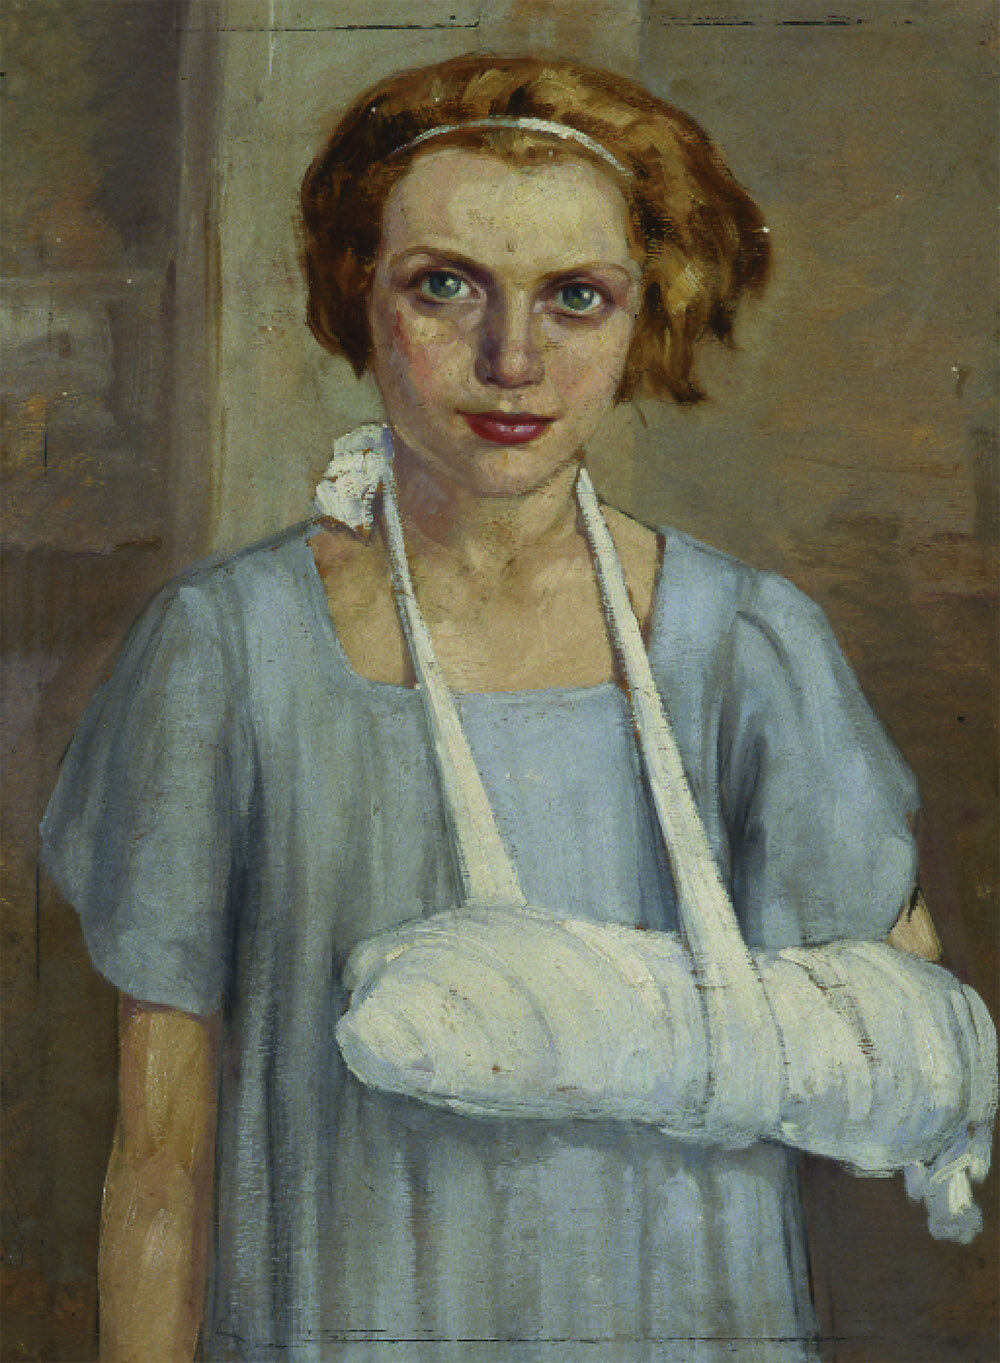 Girl with her arm in a cast (1935)